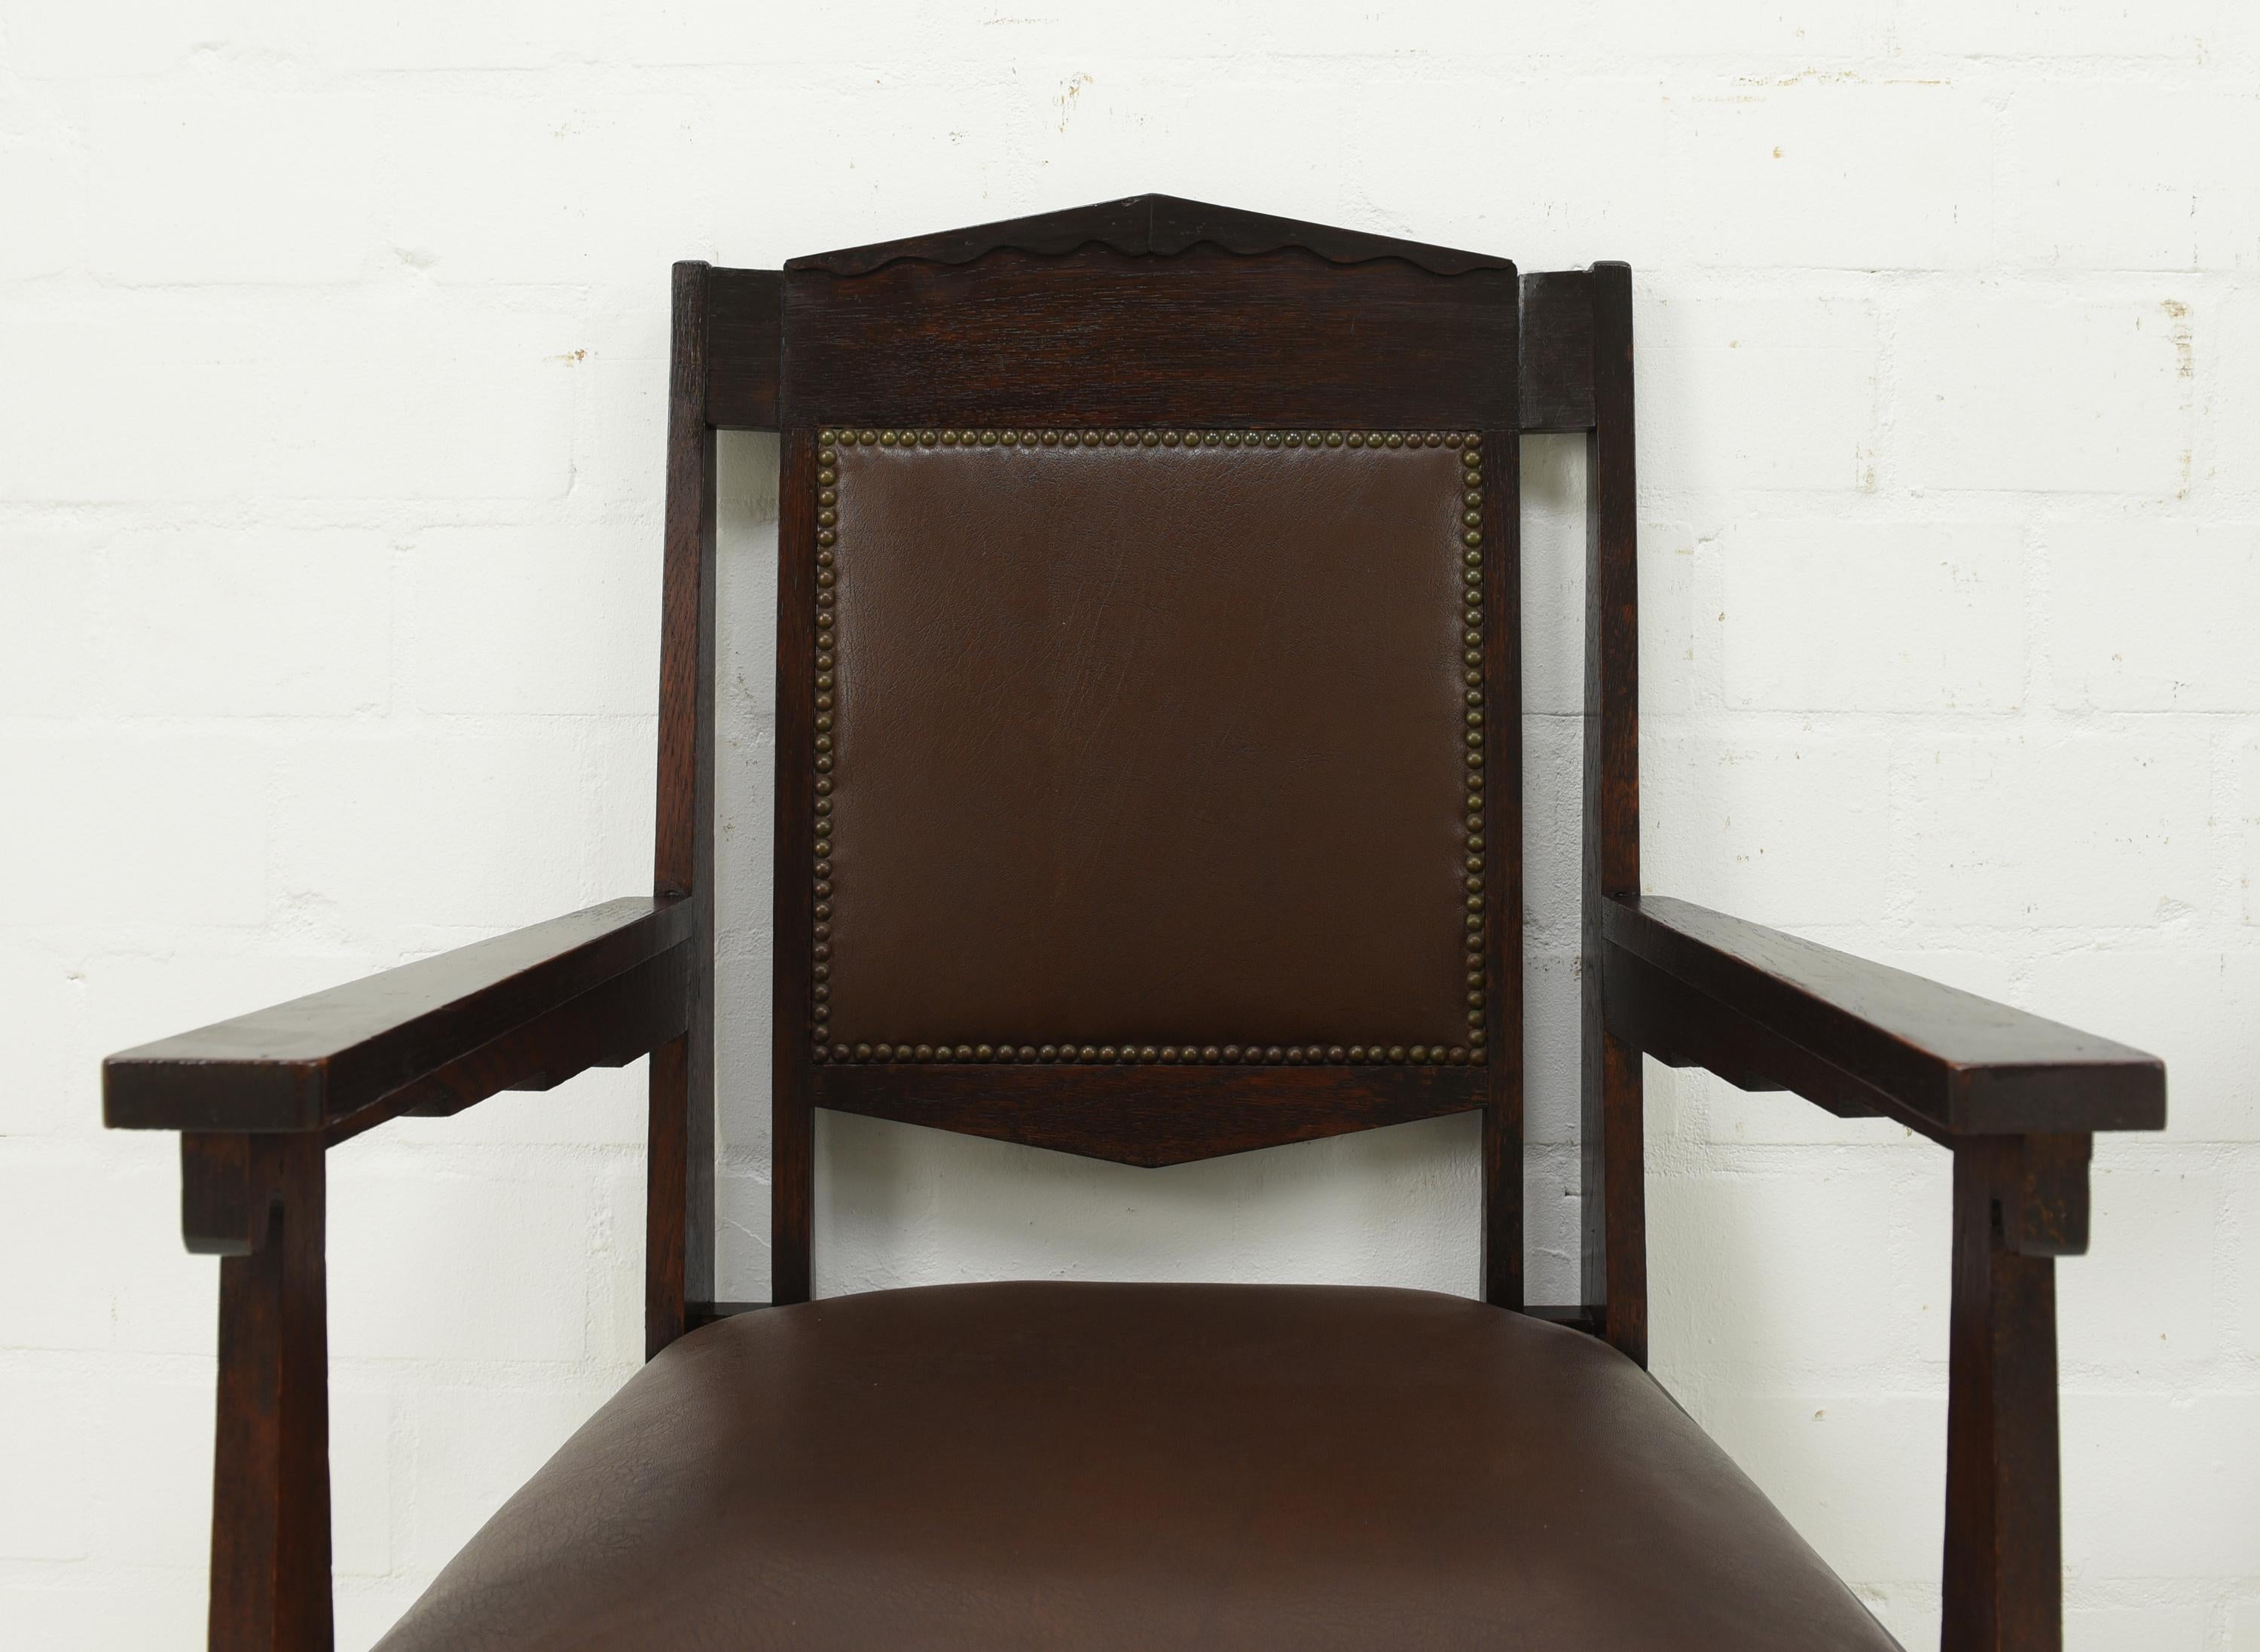 20th Century Pair of Art Deco Armchair Desk Chairs in Solid Oak, 1925 For Sale